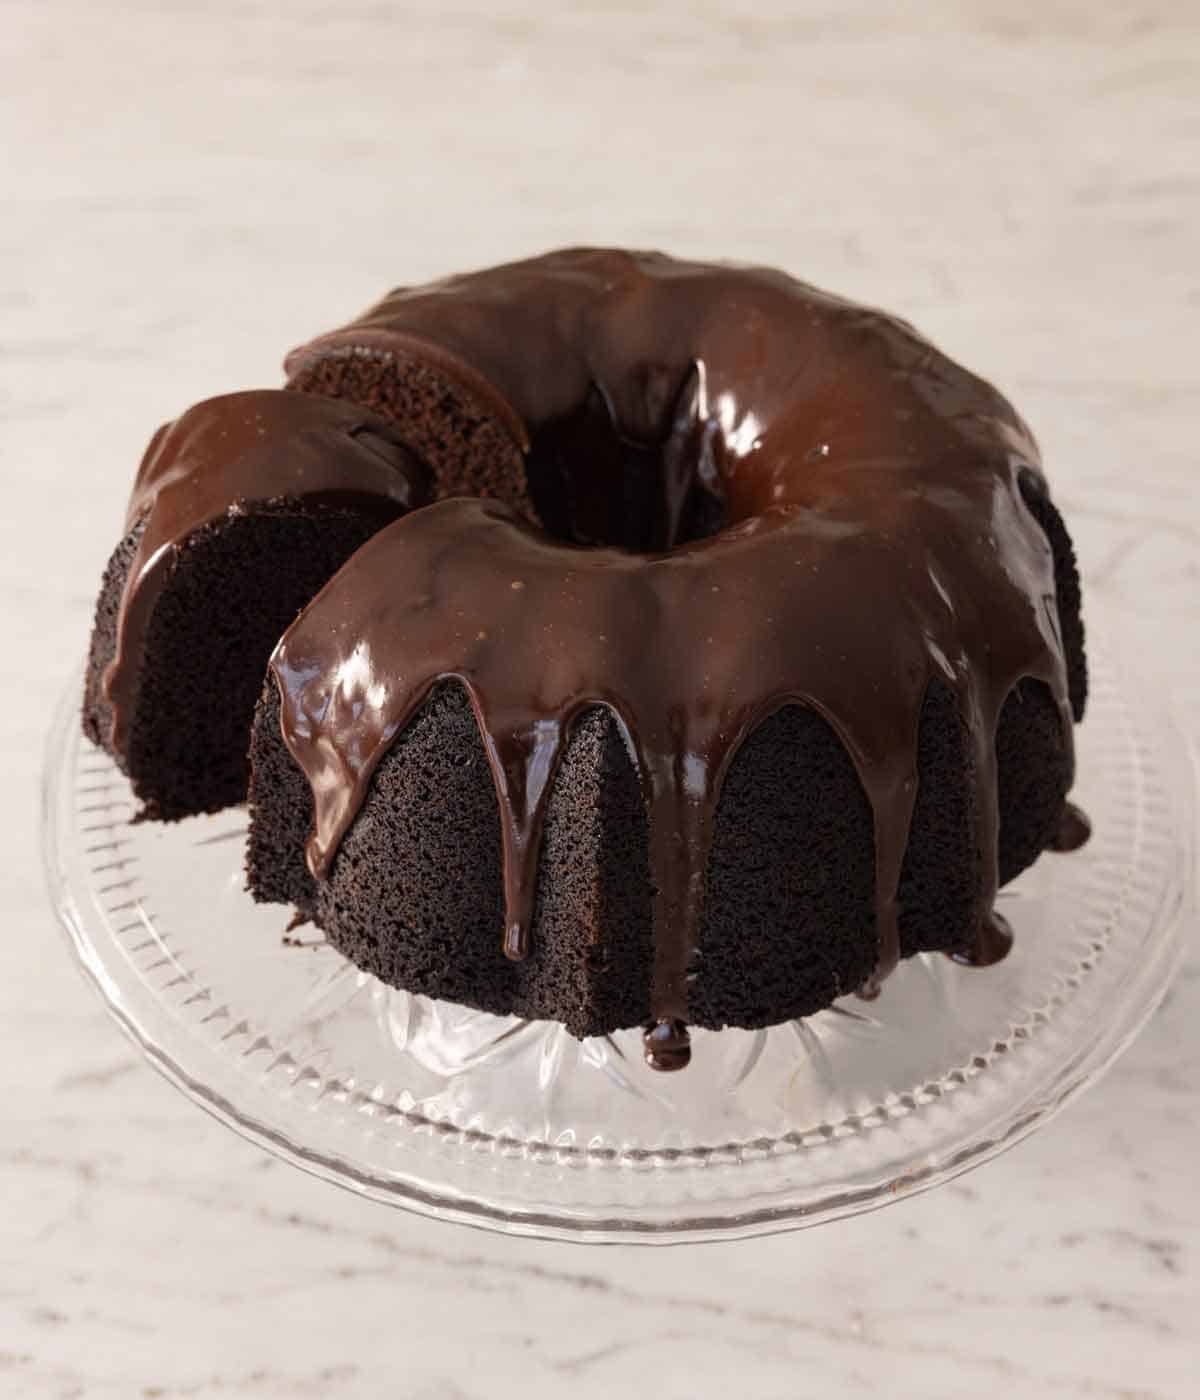 A cake stand with chocolate bundt cake with a piece cut and slightly pulled out.